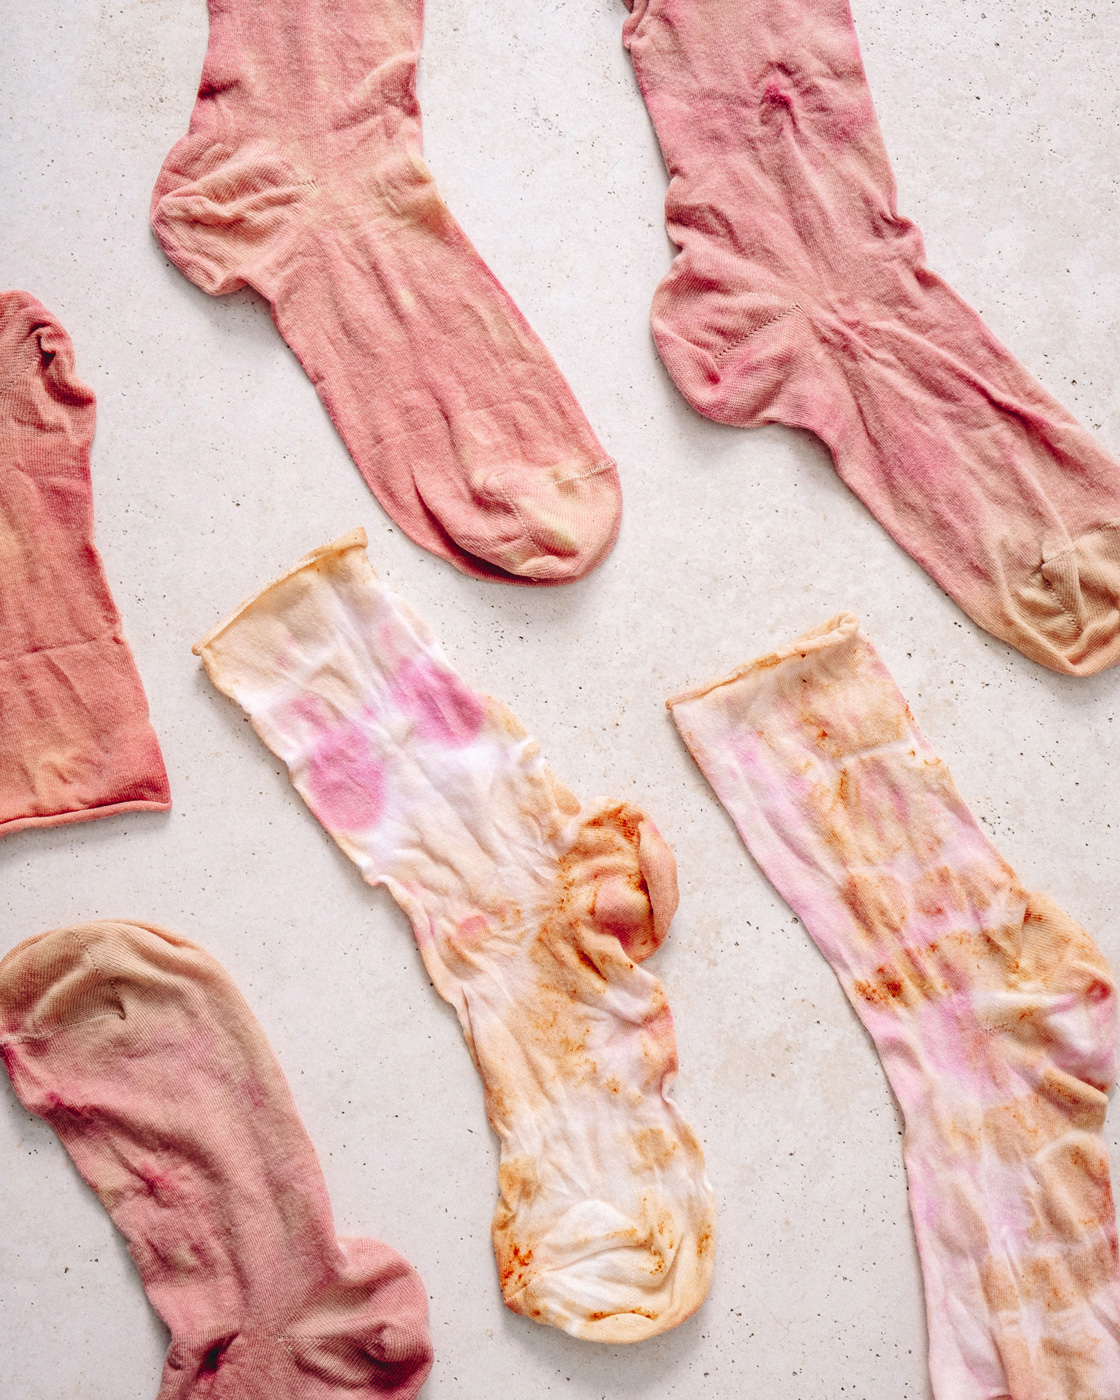 HOW TO DYE SOCKS WITH NATURAL DYES - NAGUISA